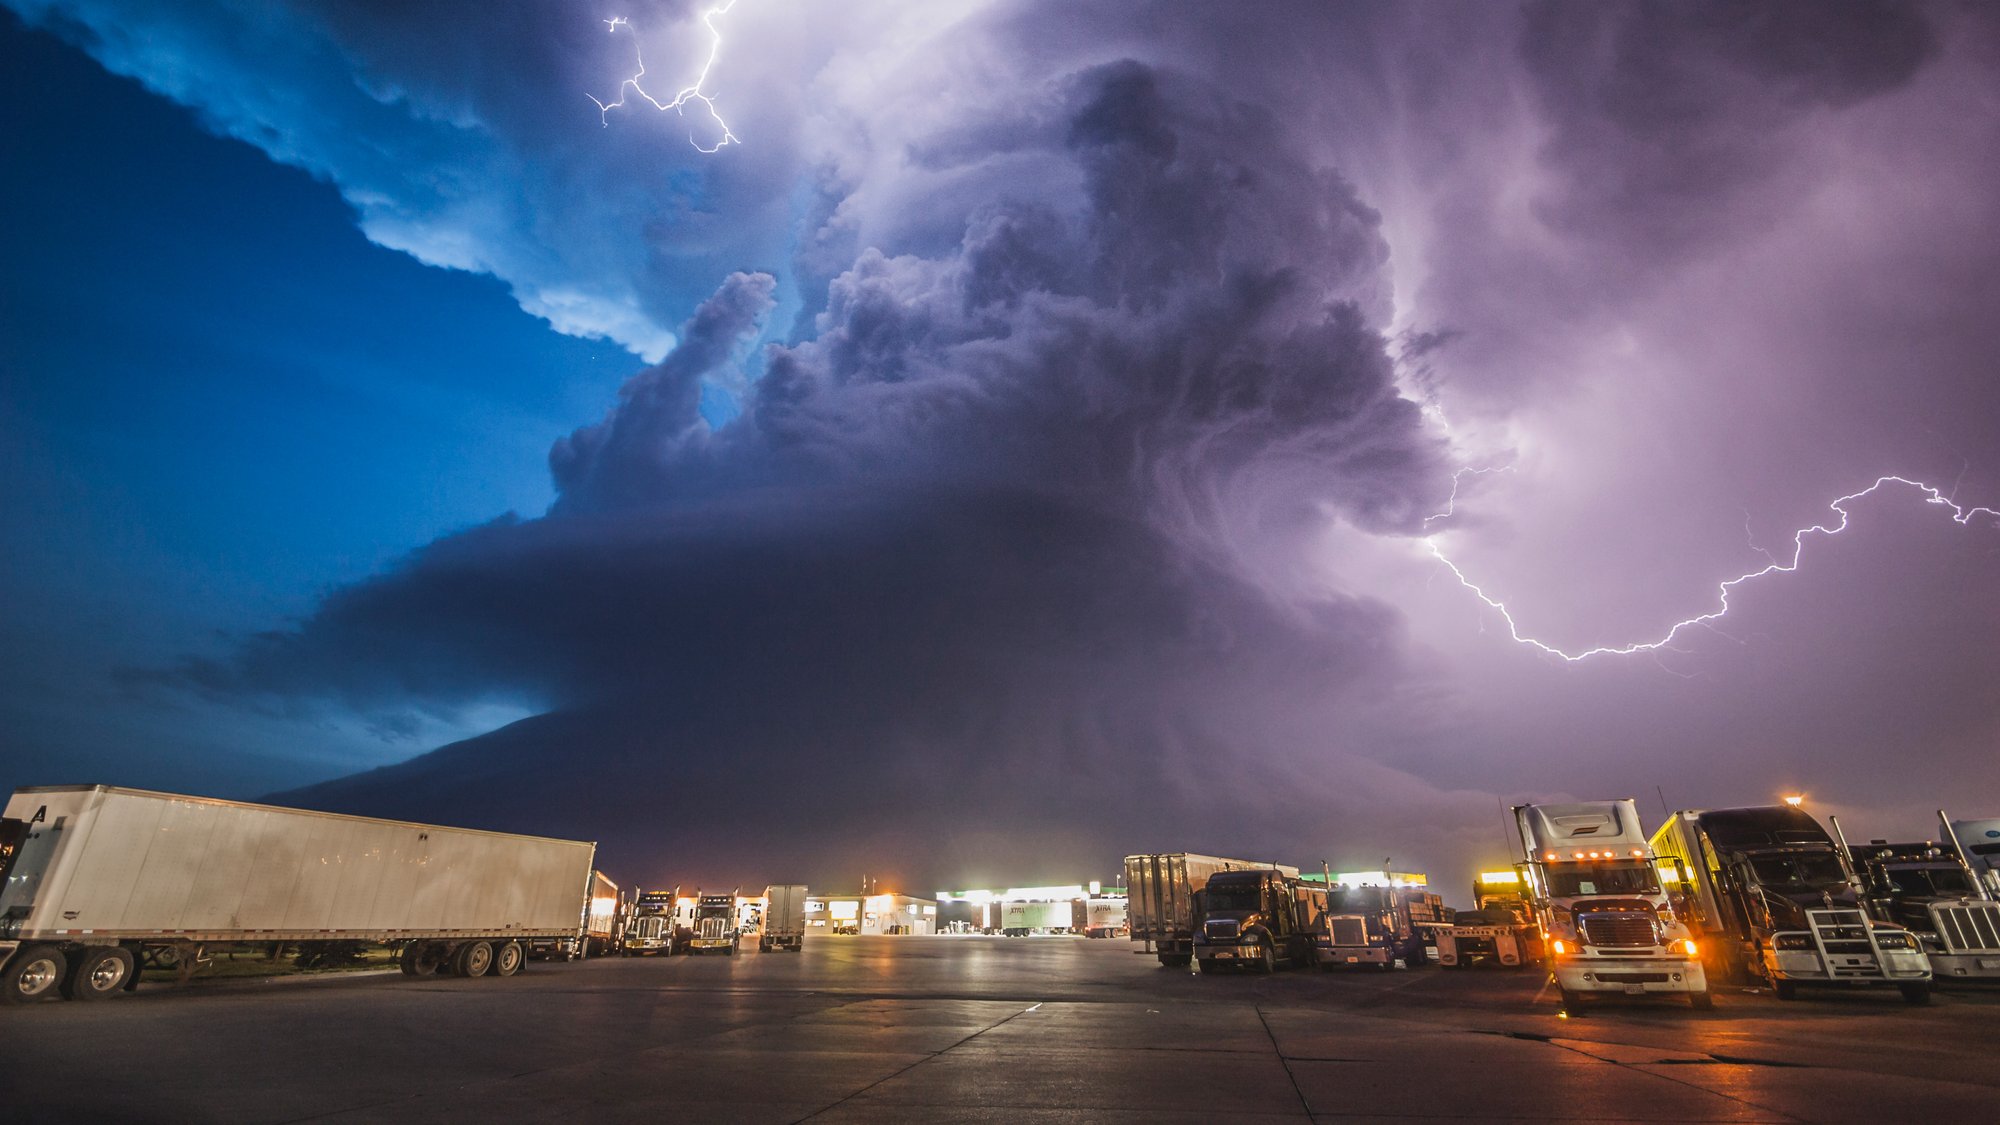 Storm over trucking facility